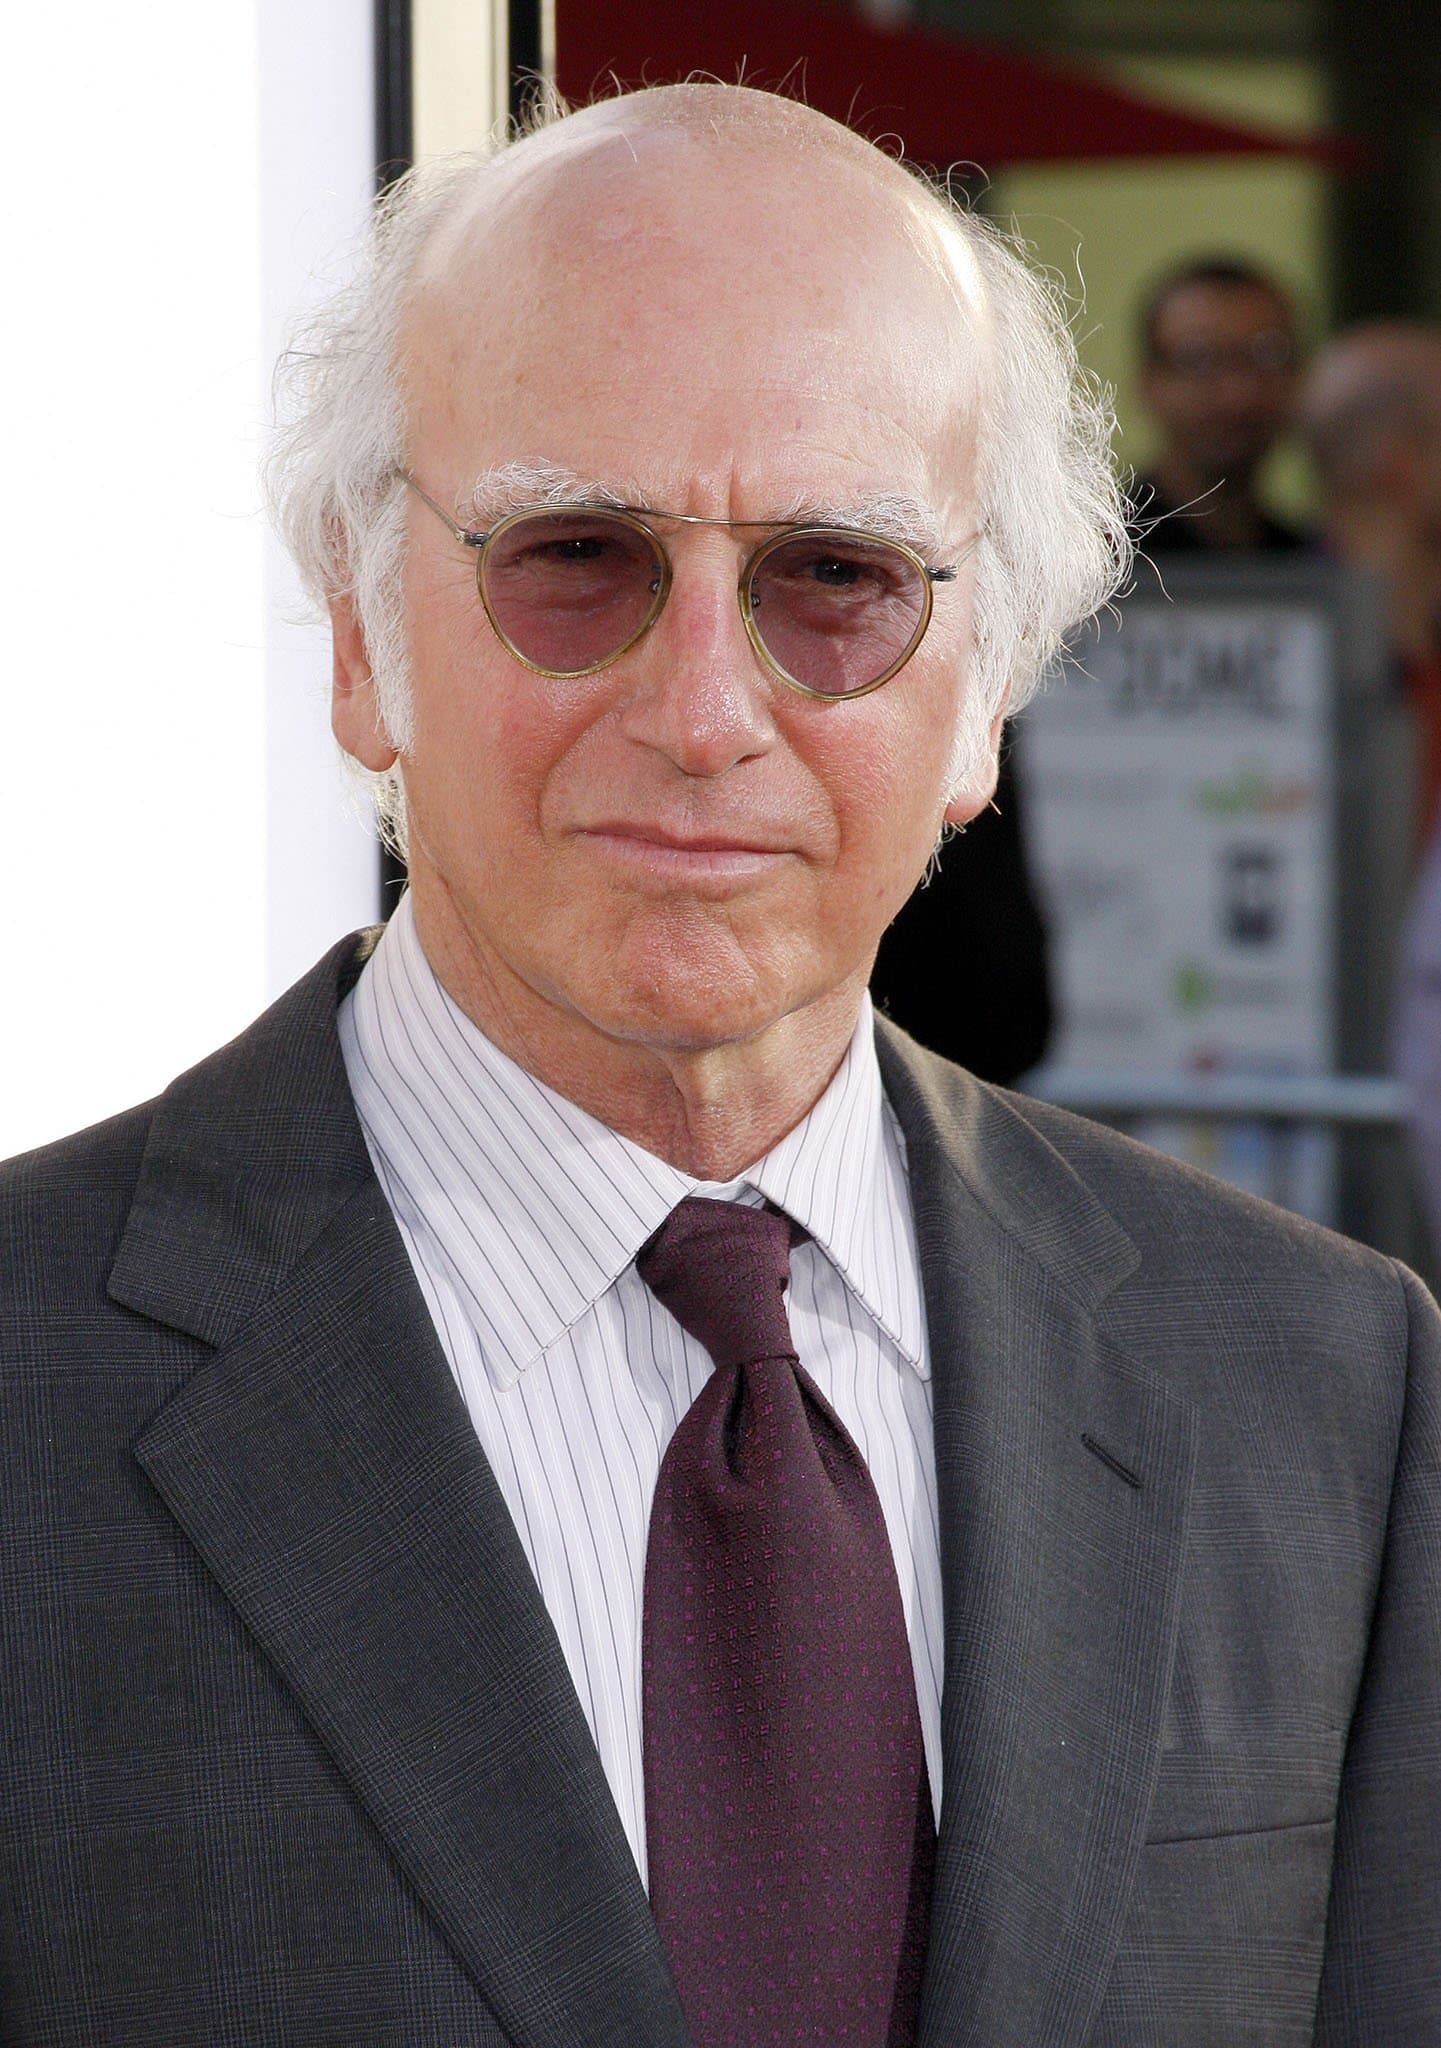 Larry David is best known as a co-creator of the television series Seinfeld, on which he was head writer and executive producer for the first seven seasons, and as the creator and star of Curb Your Enthusiasm